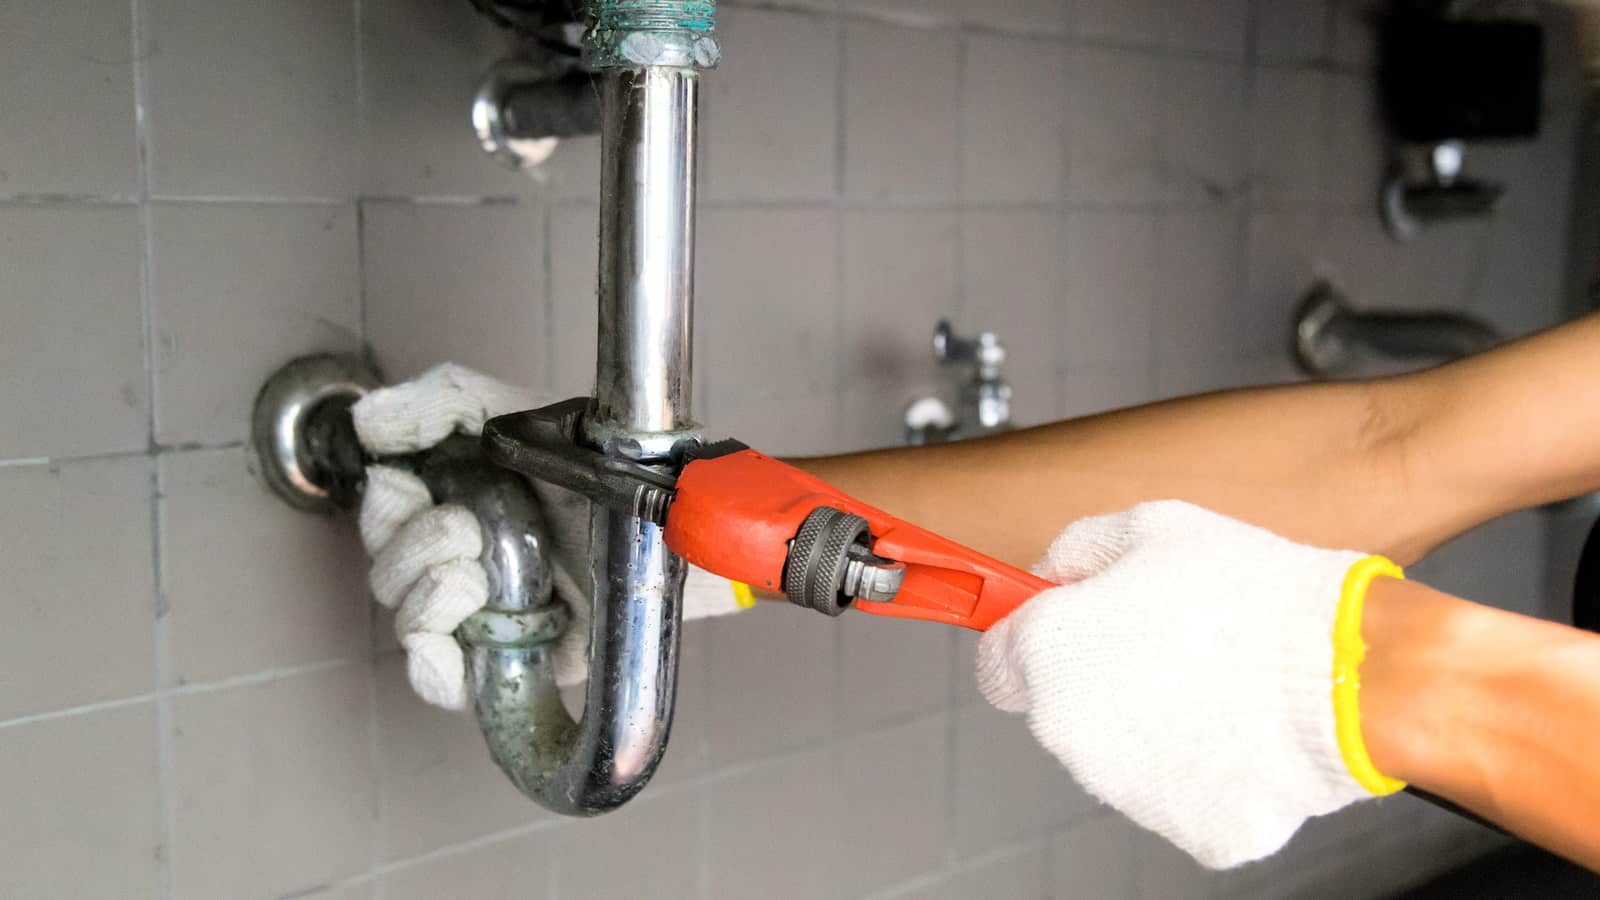 Roto Rooter Plumbing And Water Cleanup of Sugar Land